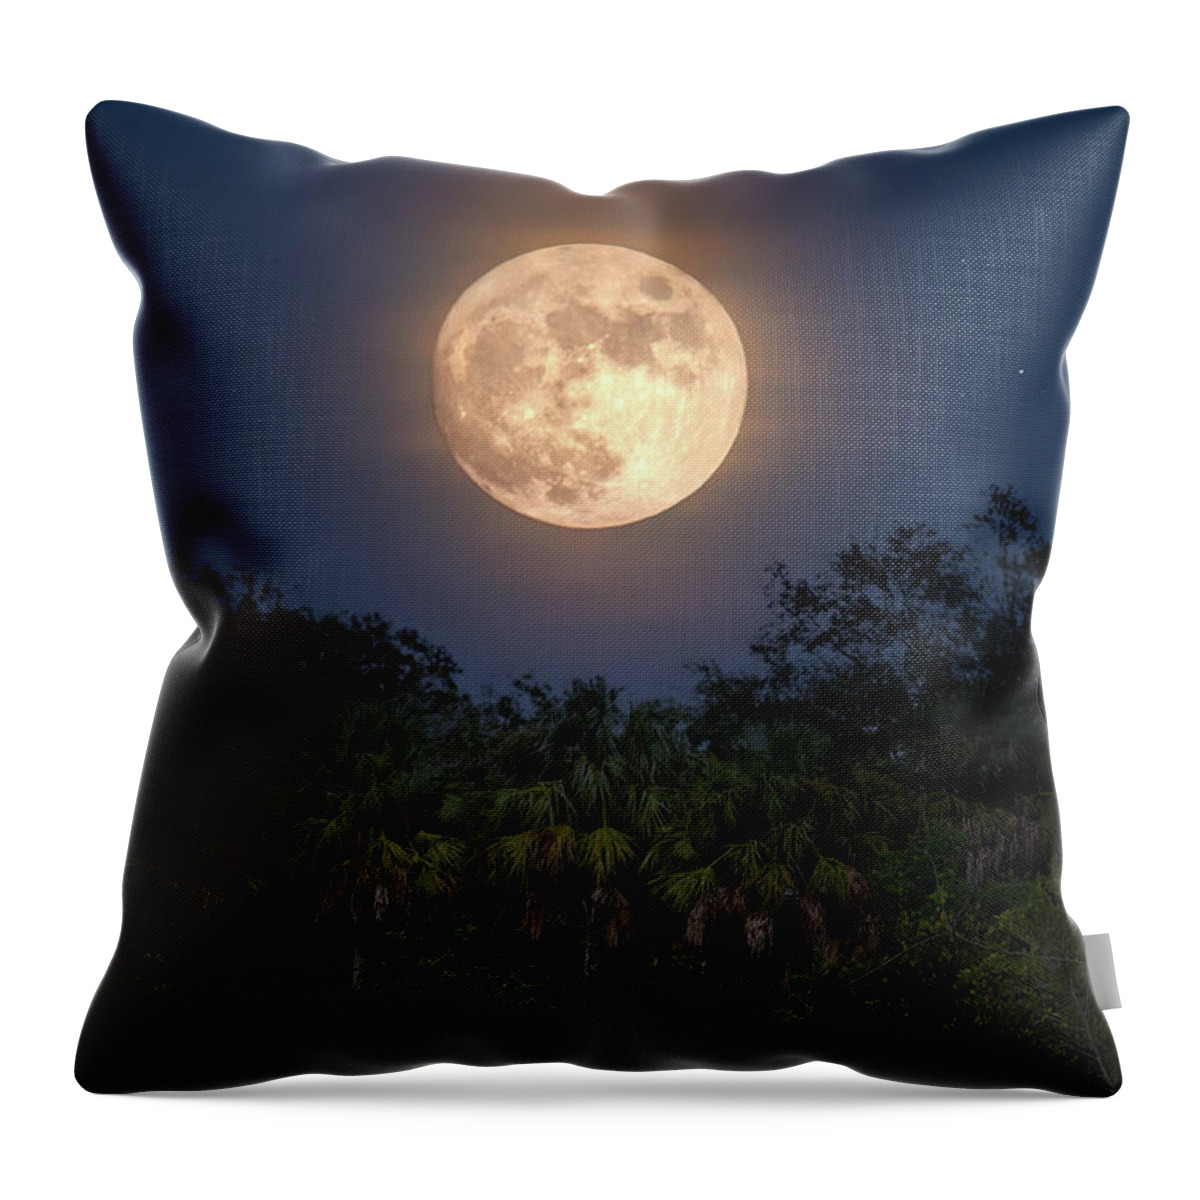 Moon Over Big Cypress Swamp Throw Pillow by Mark Andrew Thomas - Mark  Andrew Thomas - Artist Website